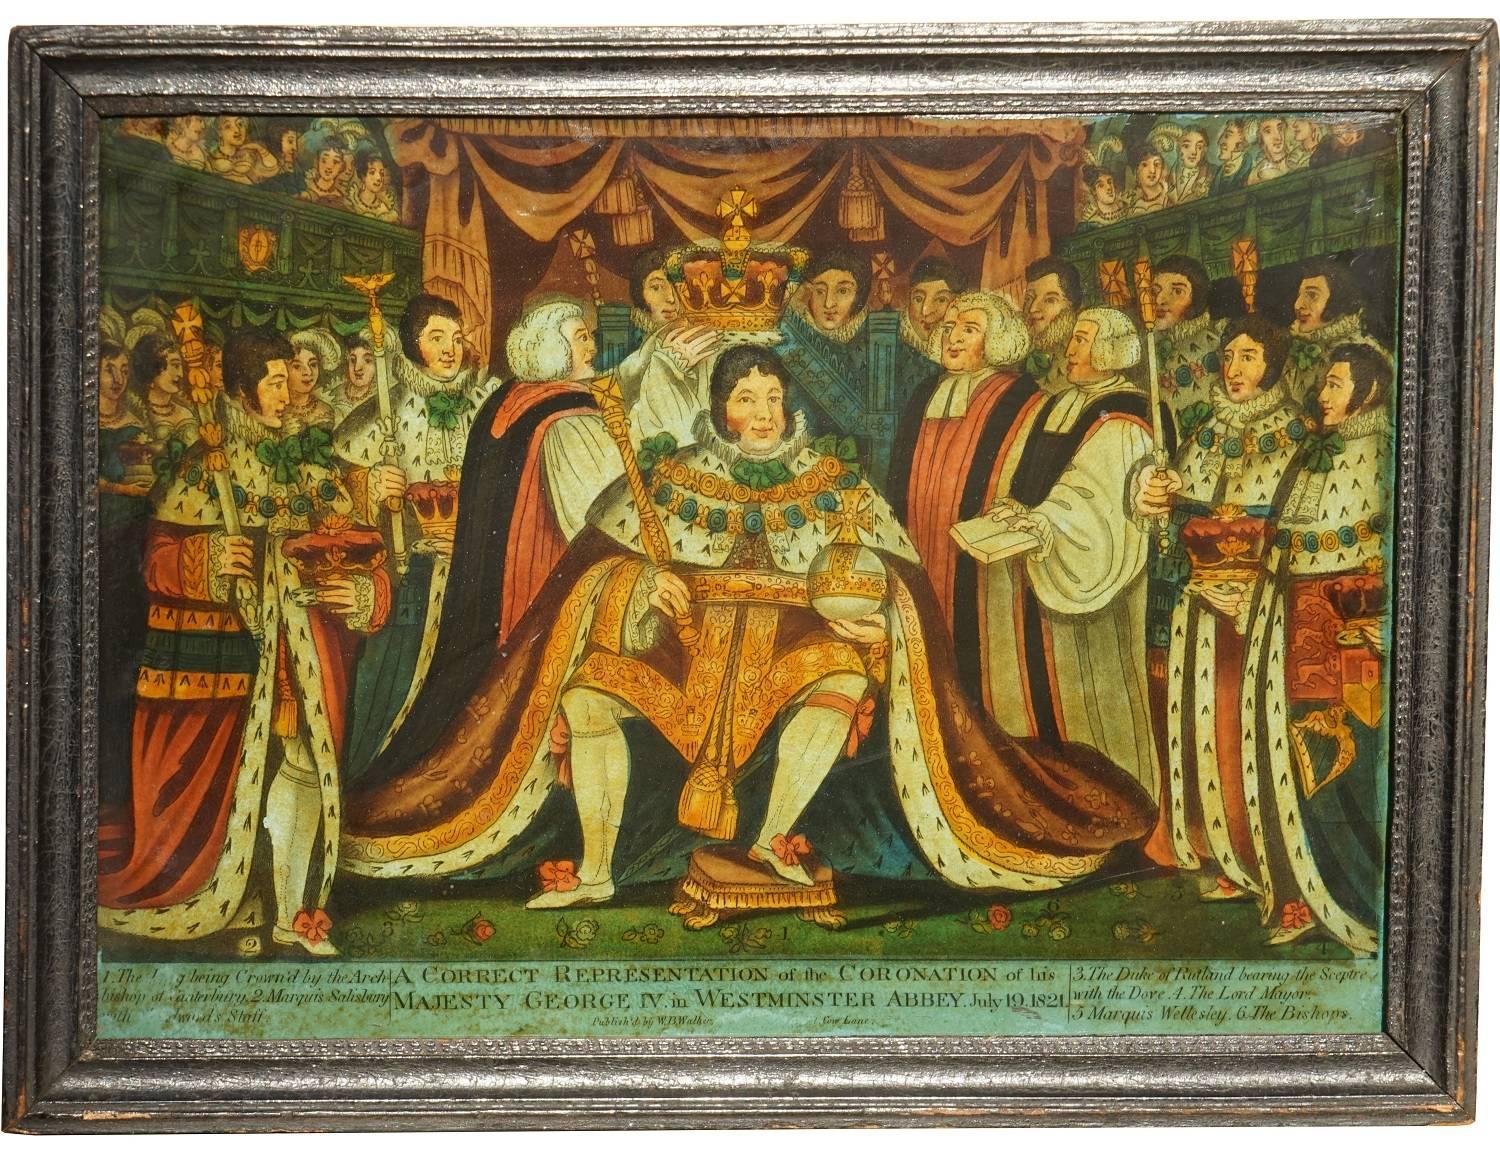 A group of 11 reverse glass mezzotints depicting various scenes relating to George III and Queen Charlotte; George IV, and his daughter and son-in-law, Princess Charlotte and Prince Leopold of Saxe-Coburg. The group includes a number of scenes